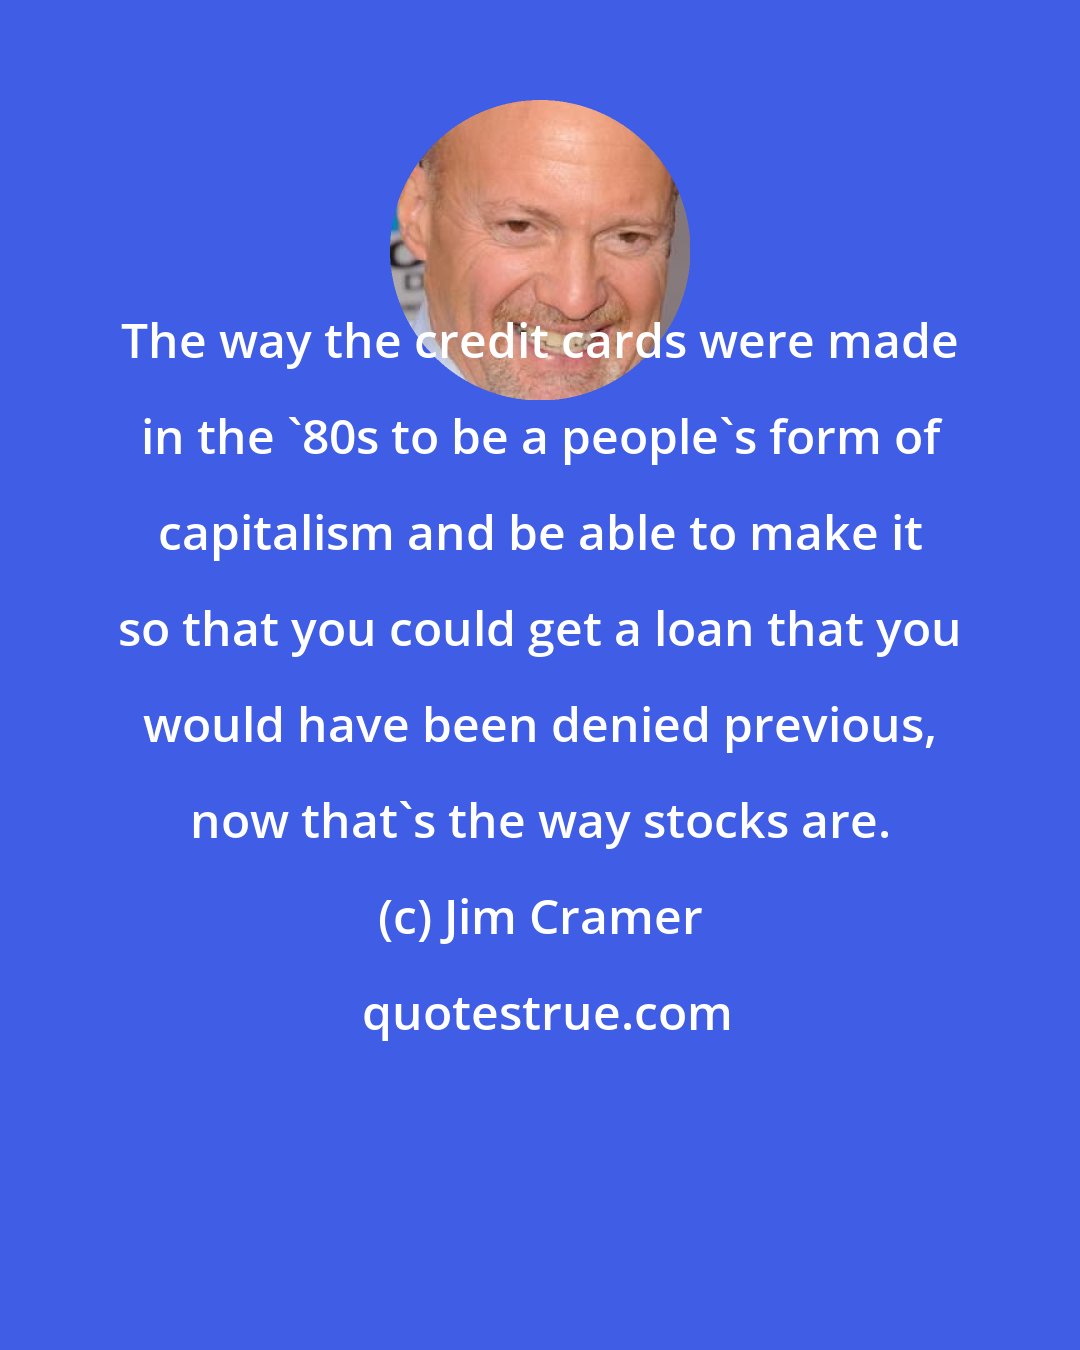 Jim Cramer: The way the credit cards were made in the '80s to be a people's form of capitalism and be able to make it so that you could get a loan that you would have been denied previous, now that's the way stocks are.